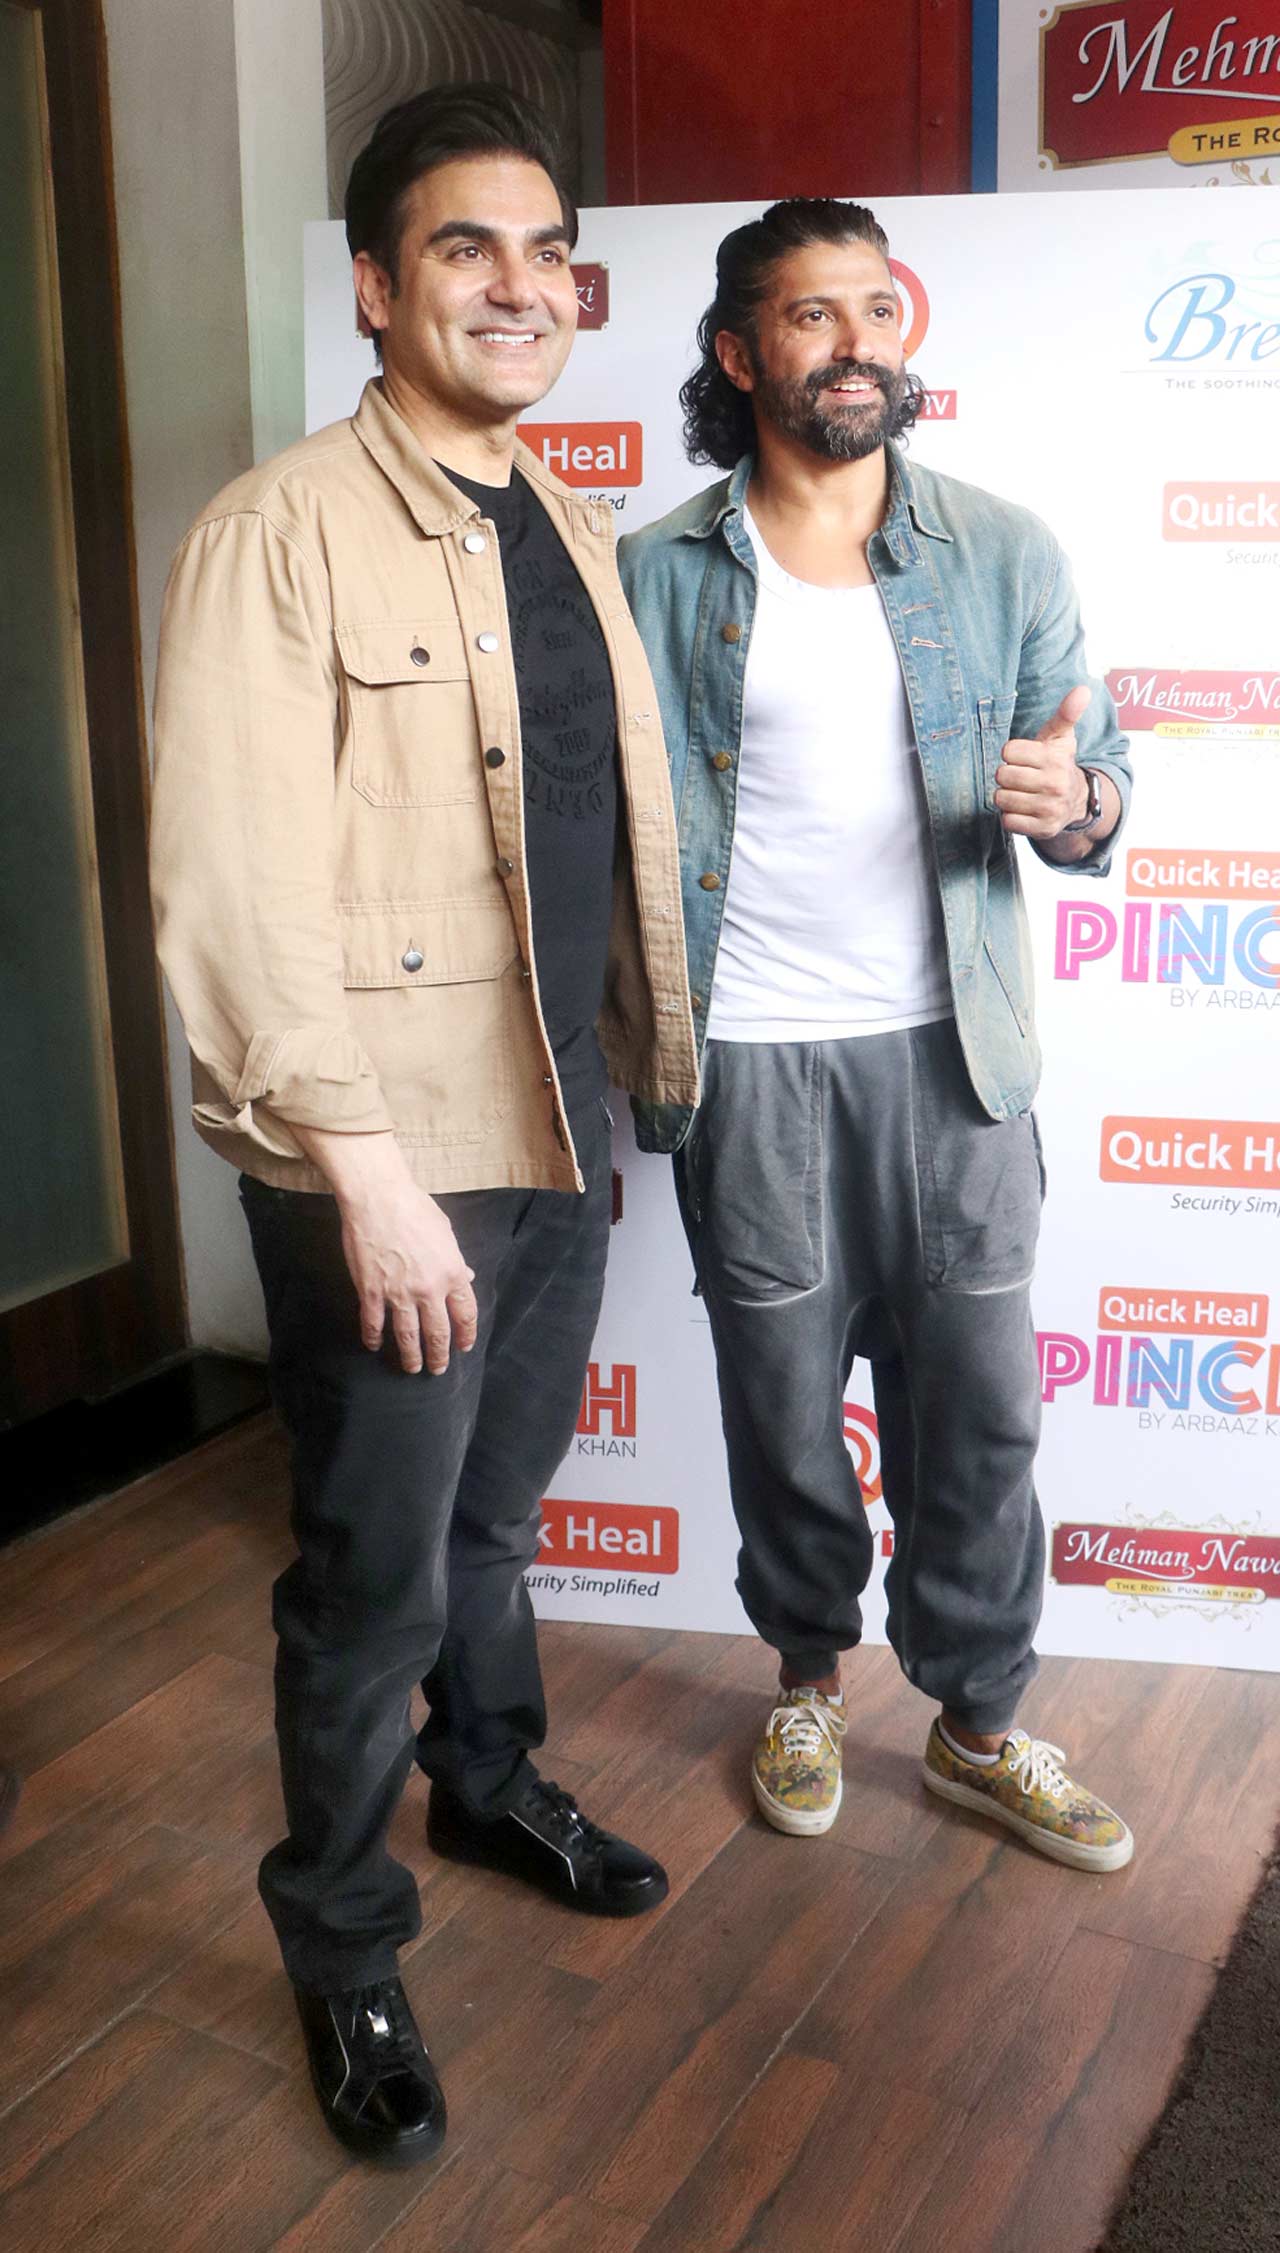 Arbaaz Khan and Farhan Akhtar happily posed for the paparazzi. Arbaaz sported a black t-shirt, pant and brown jacket, while Farhan opted for a white t-shirt and blue jacket.